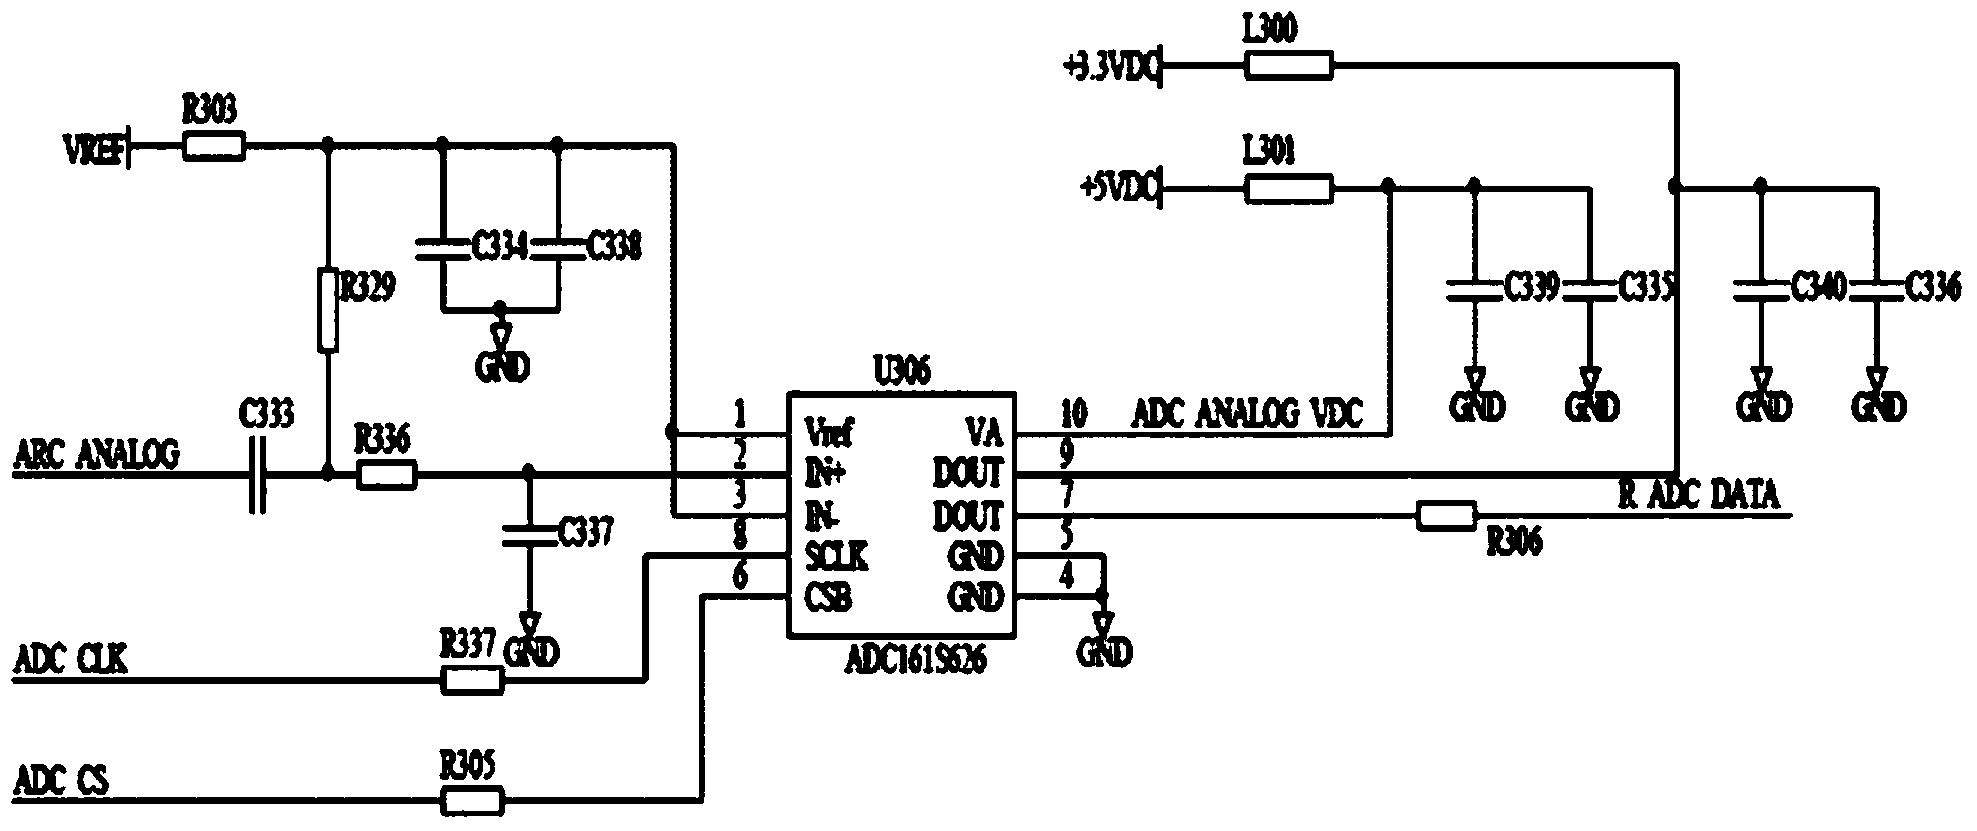 Fault arc detection device for electric car